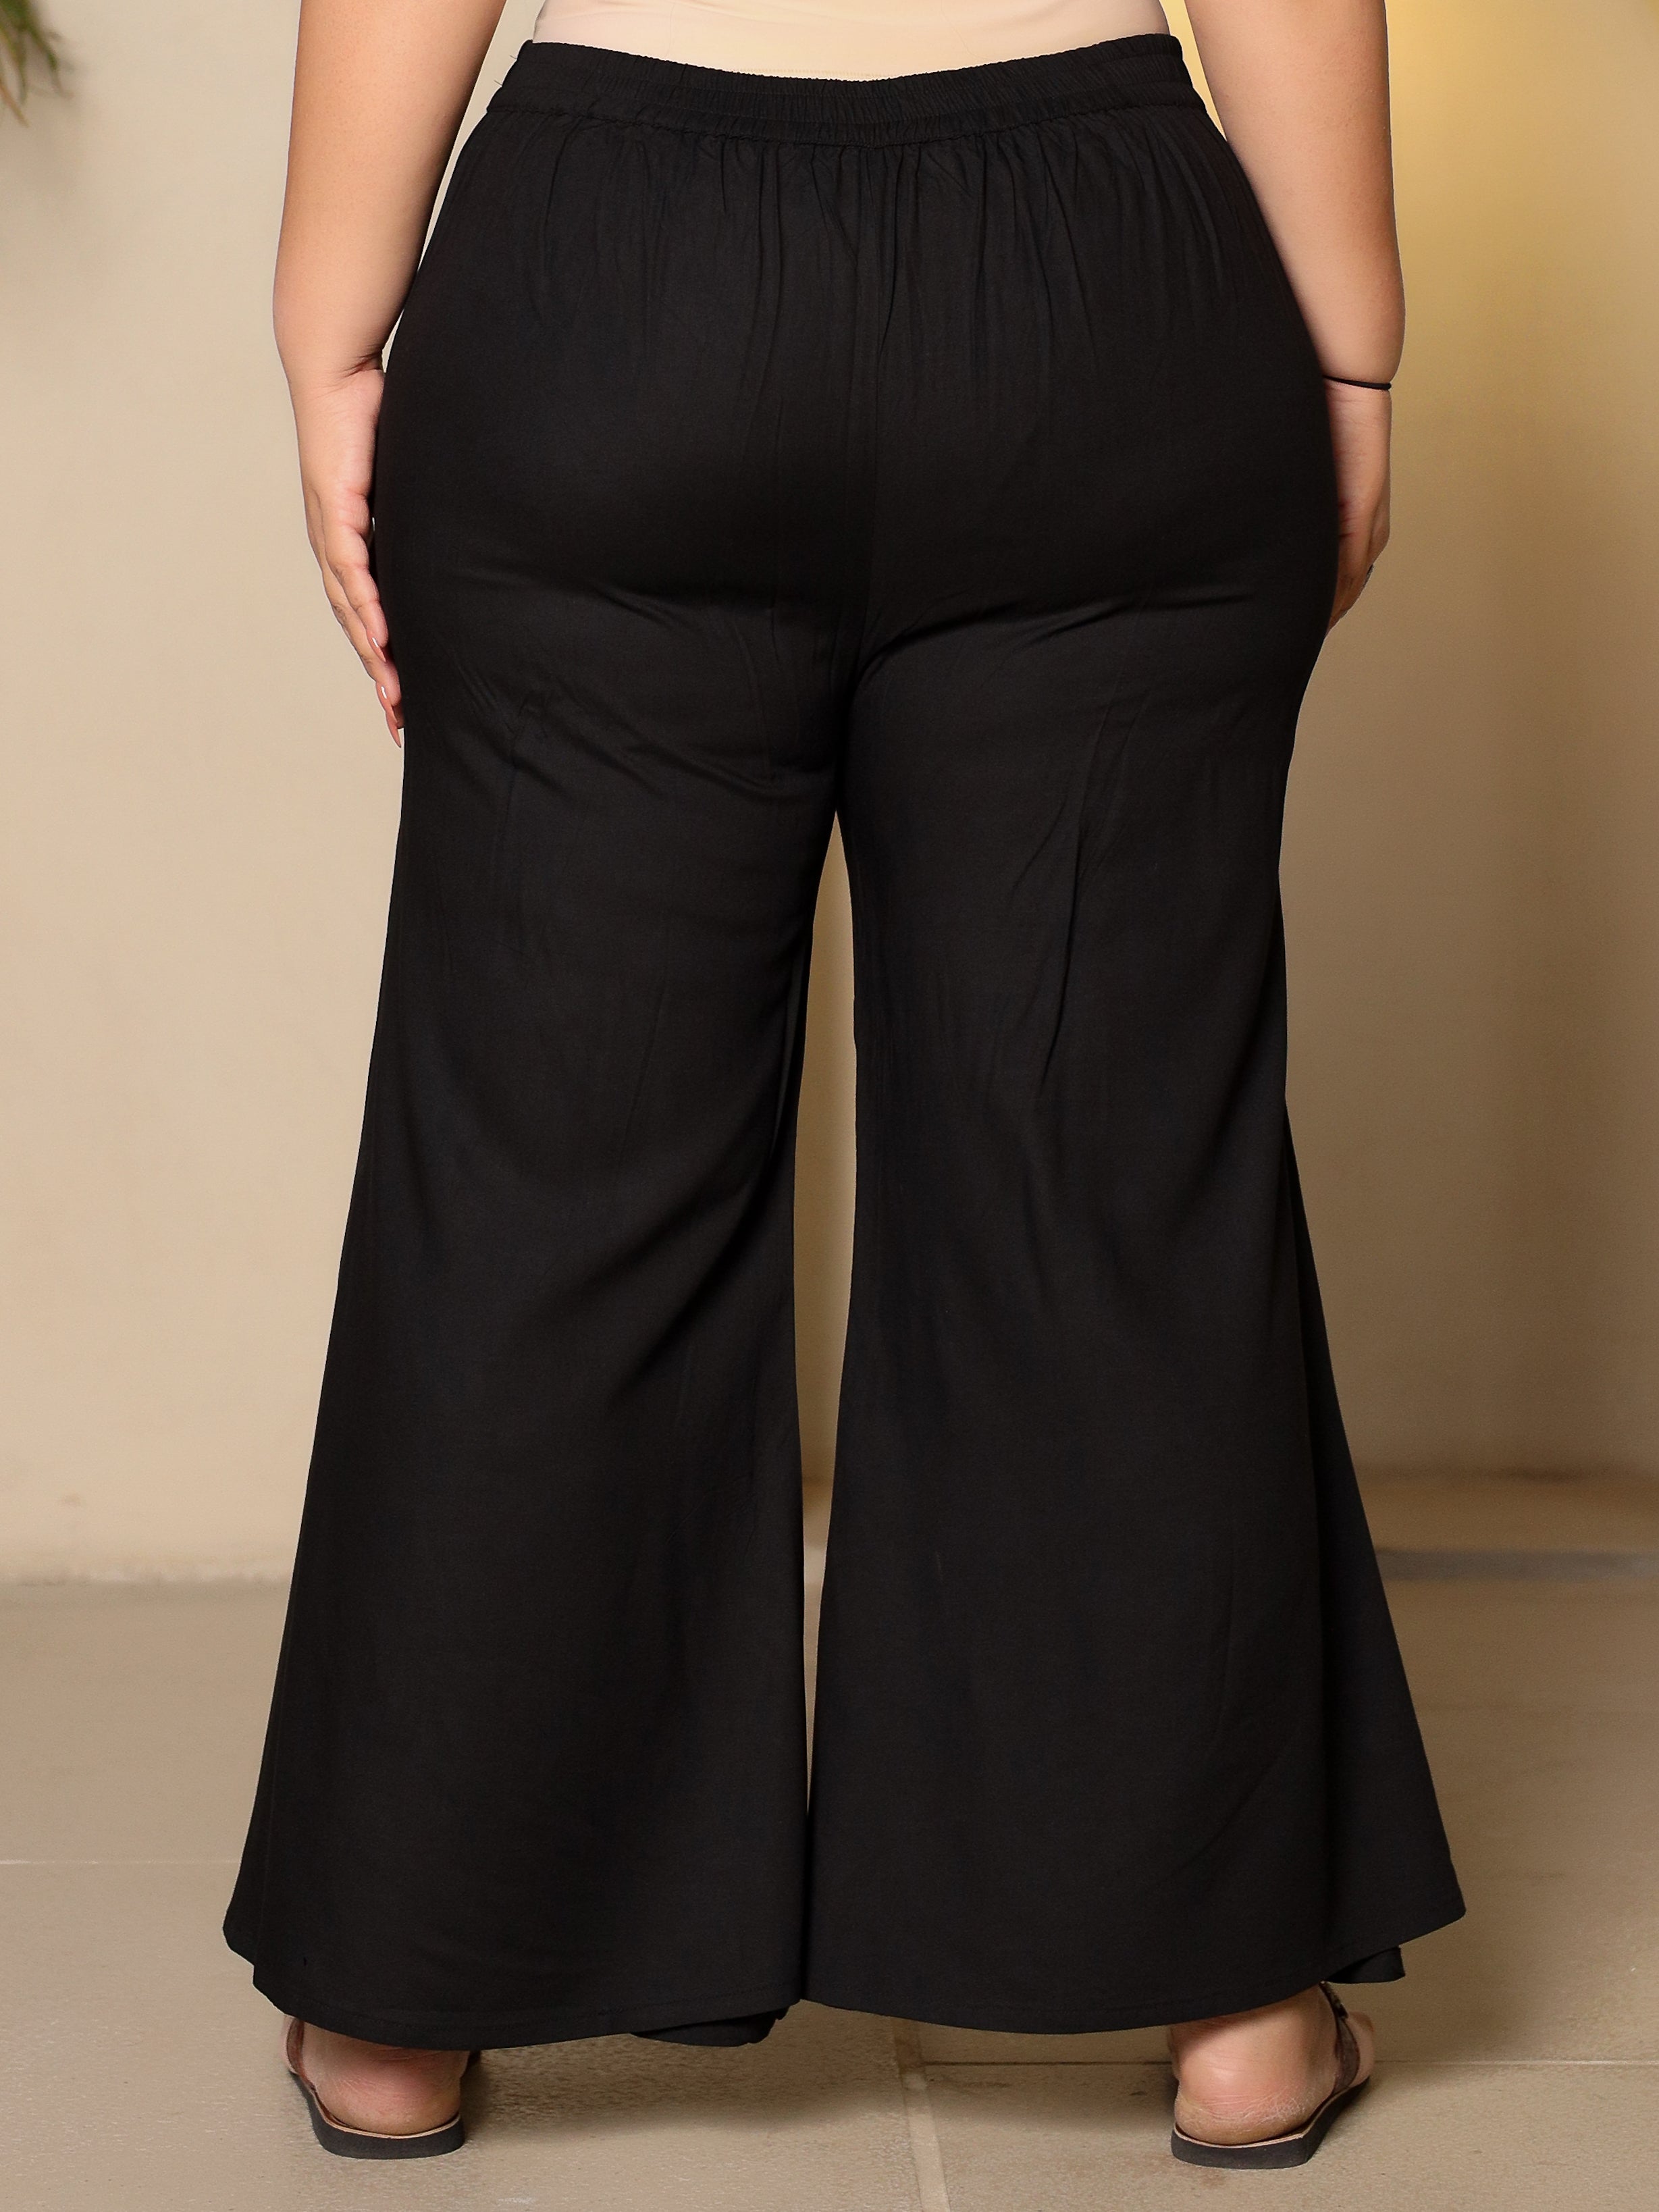 Juniper Black Modal Rayon Women Partially Elasticated Plus Size Bell Bottom Pants With Single Side Pocket